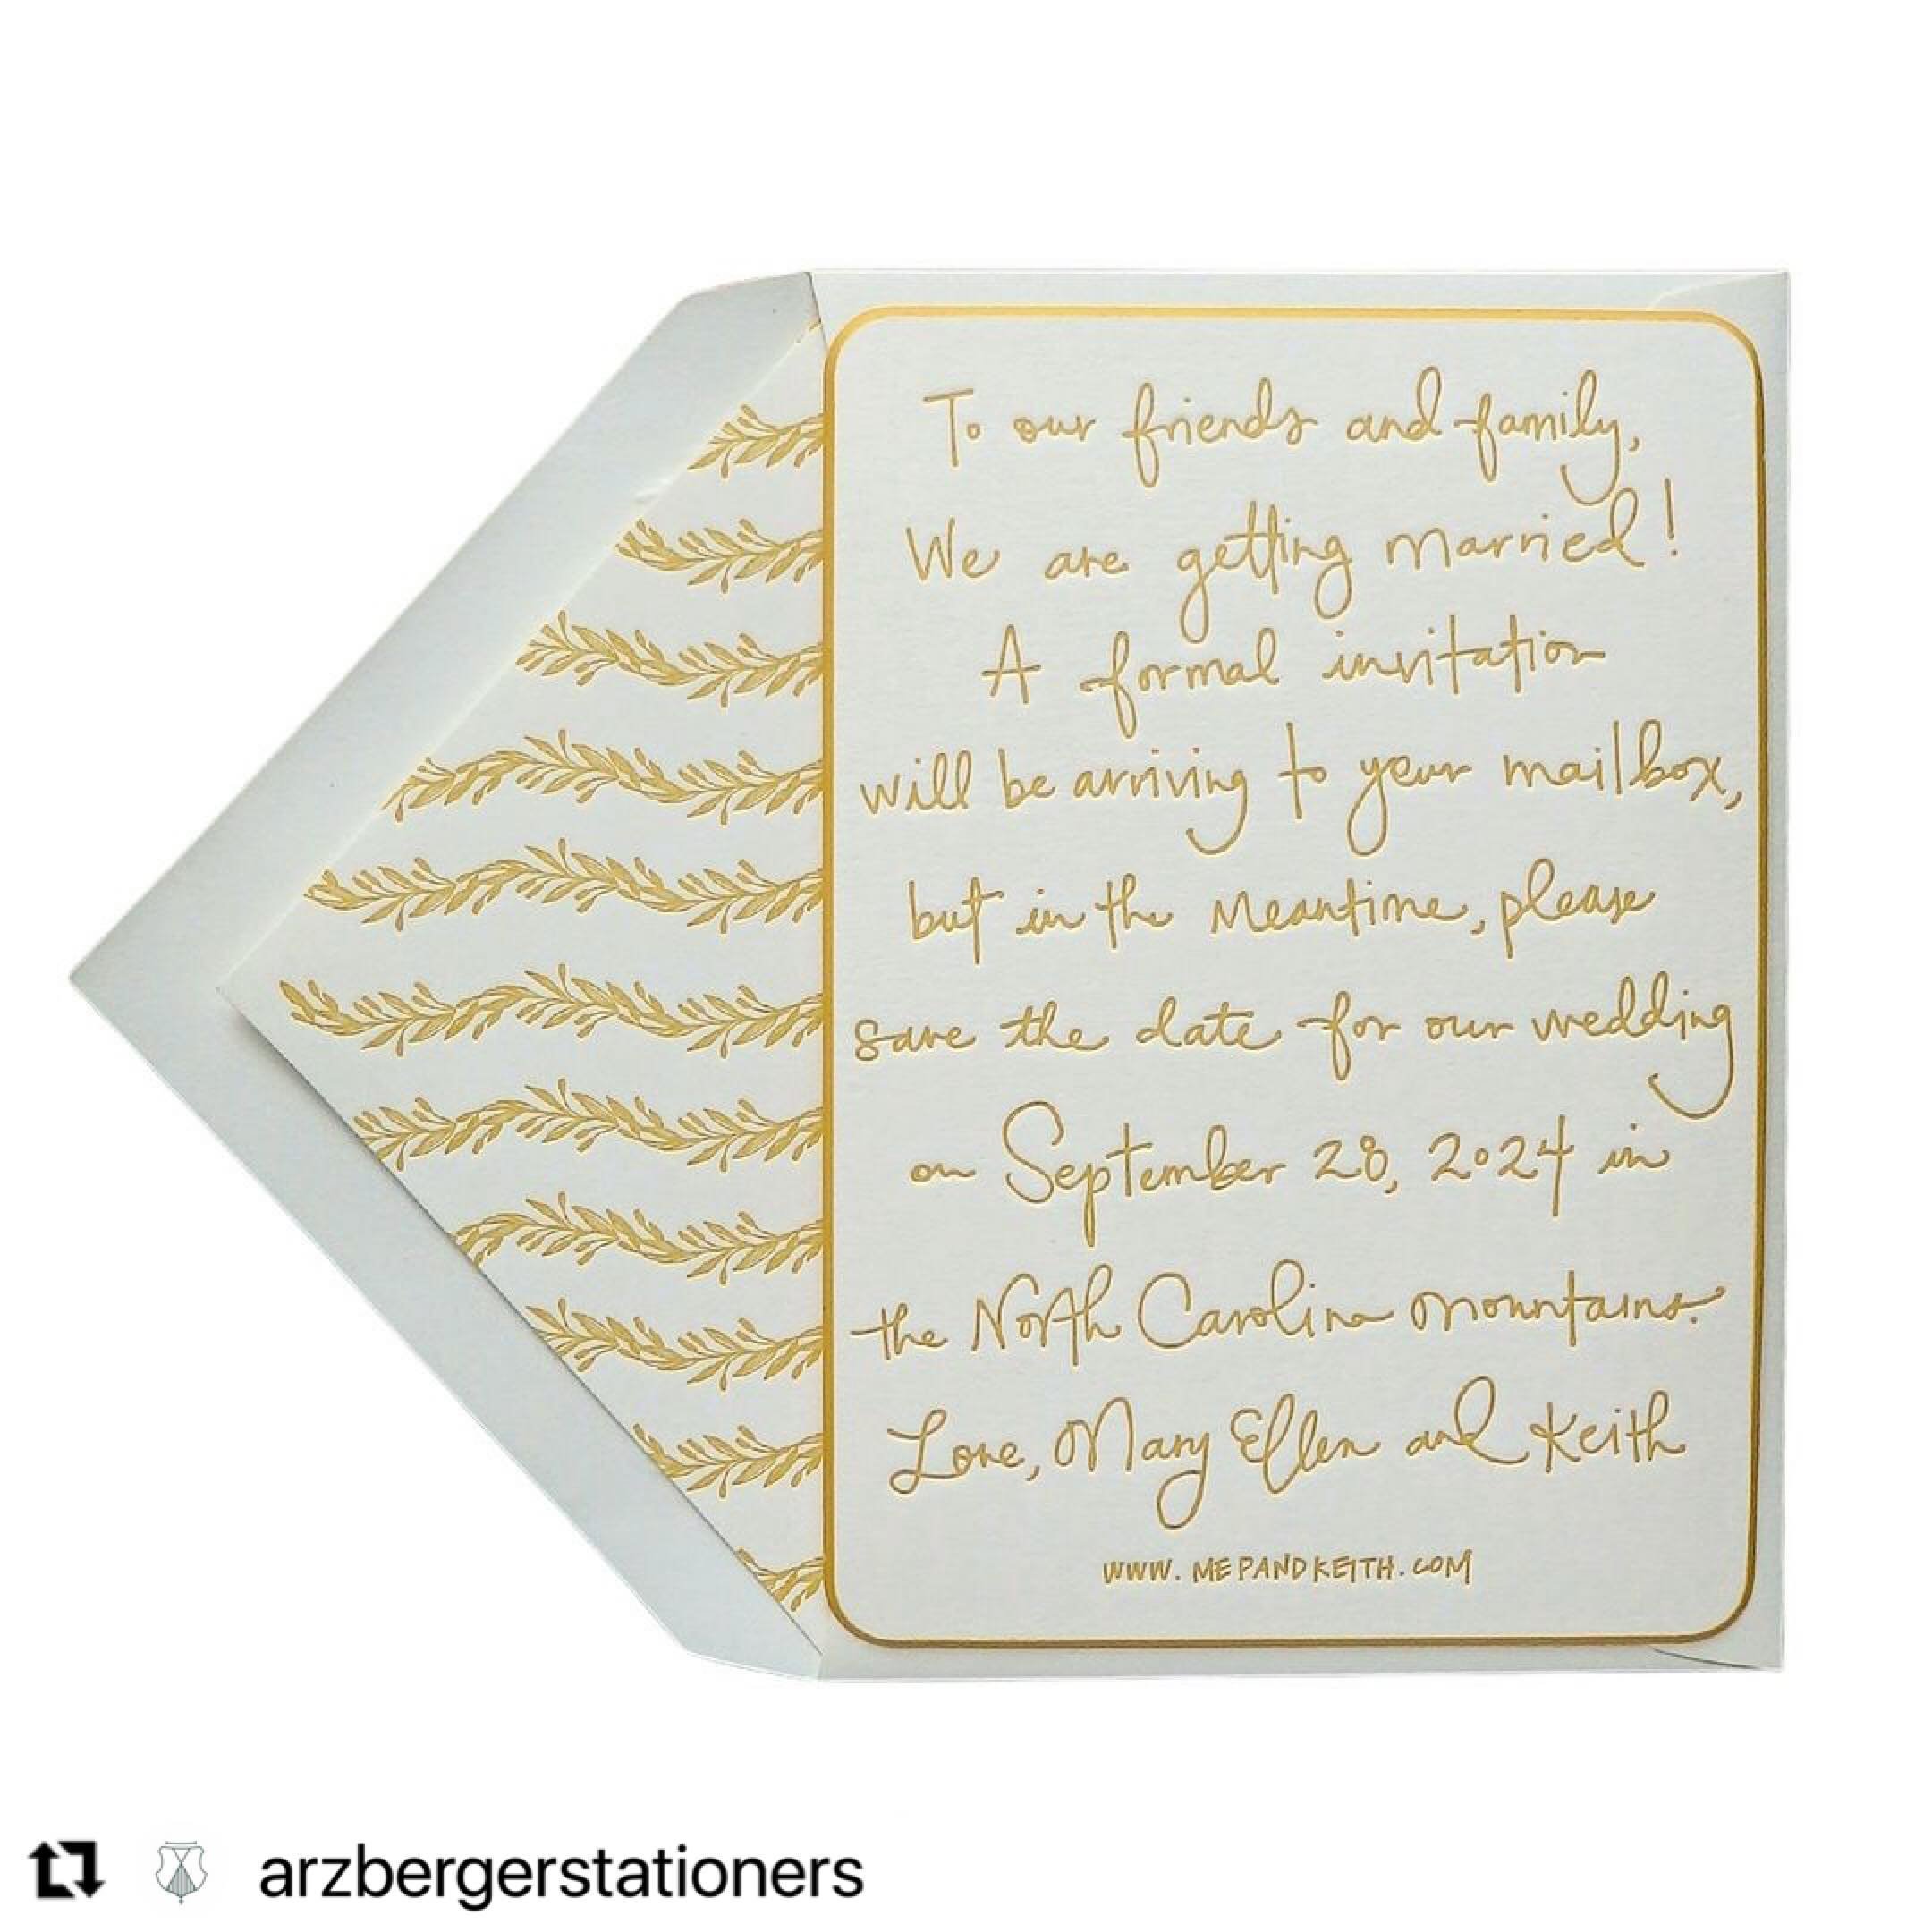 A save the date that reads like a letter &mdash; we 💛 it! What do you think?
@adelaide.artandpapers @arzbergerstationers